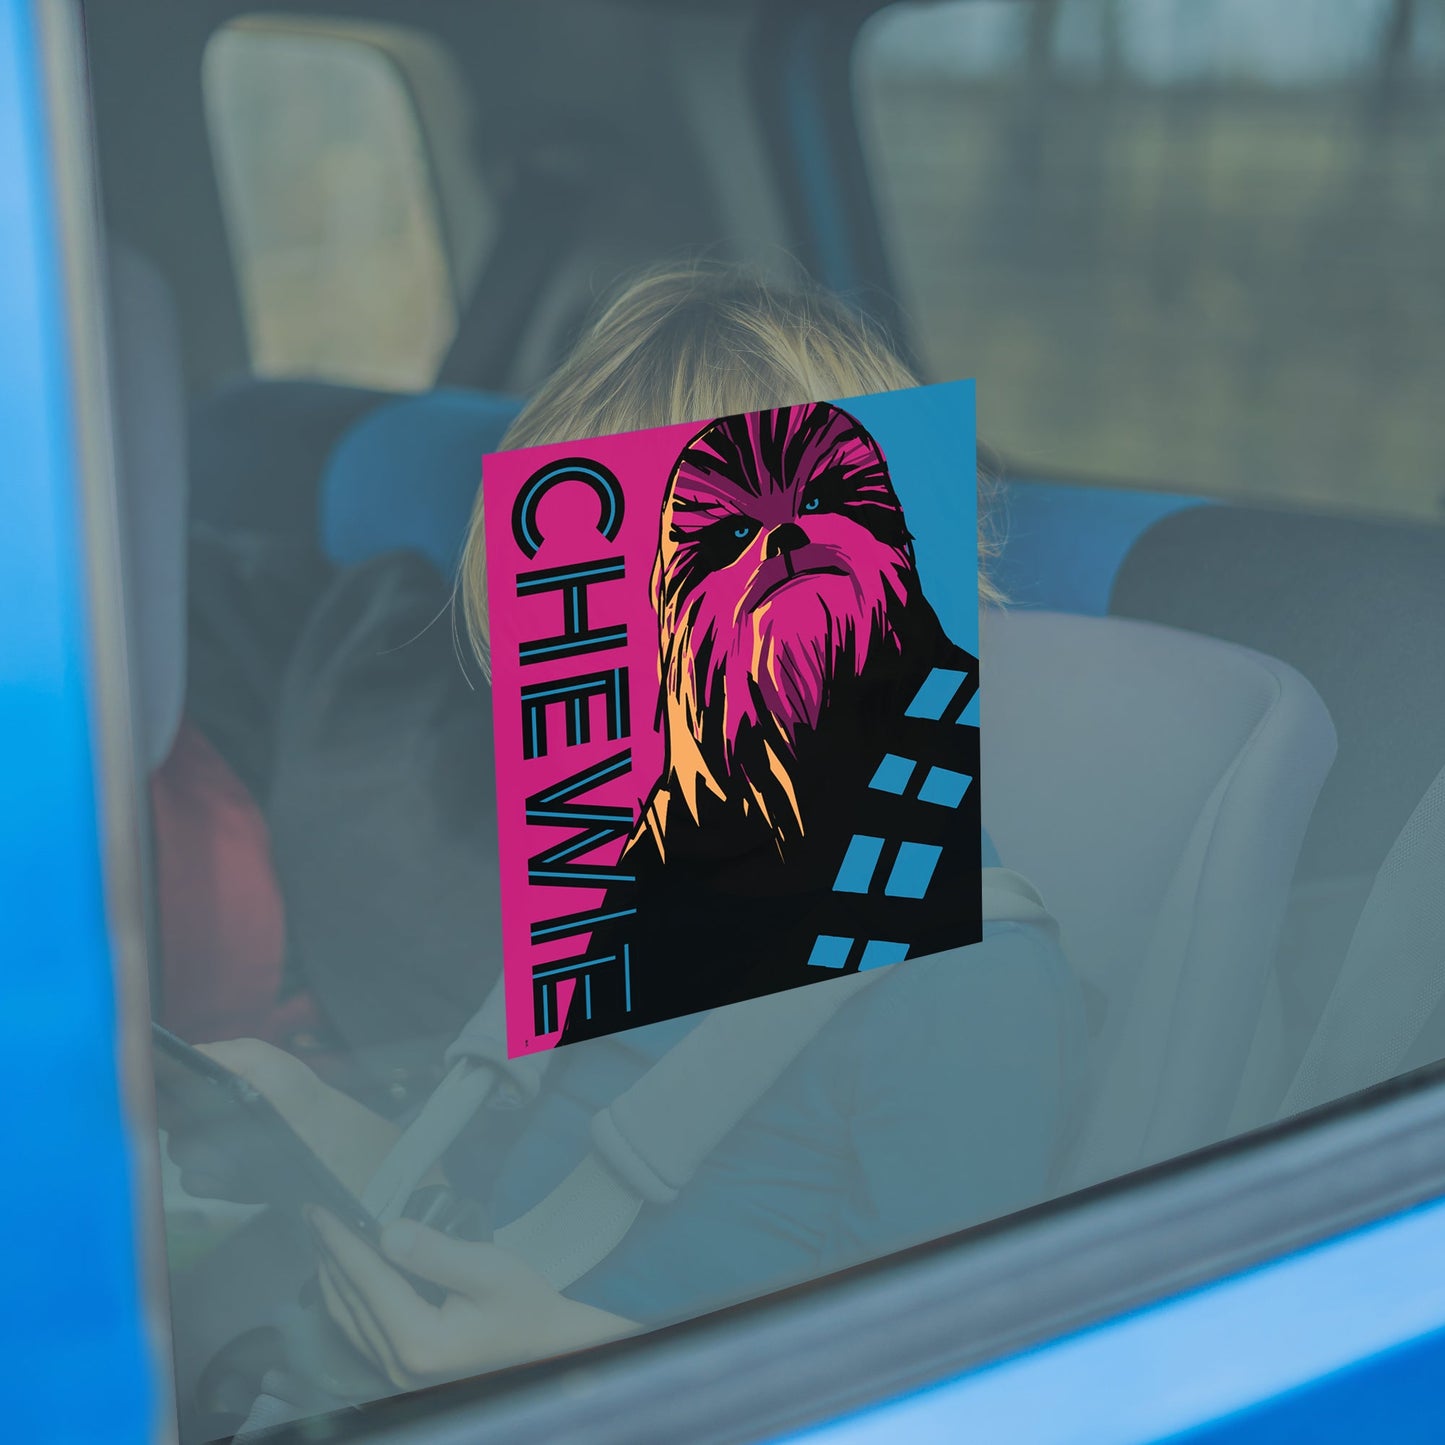 Chewbacca CHEWIE Pop Art Window Cling - Officially Licensed Star Wars Removable Window Static Decal